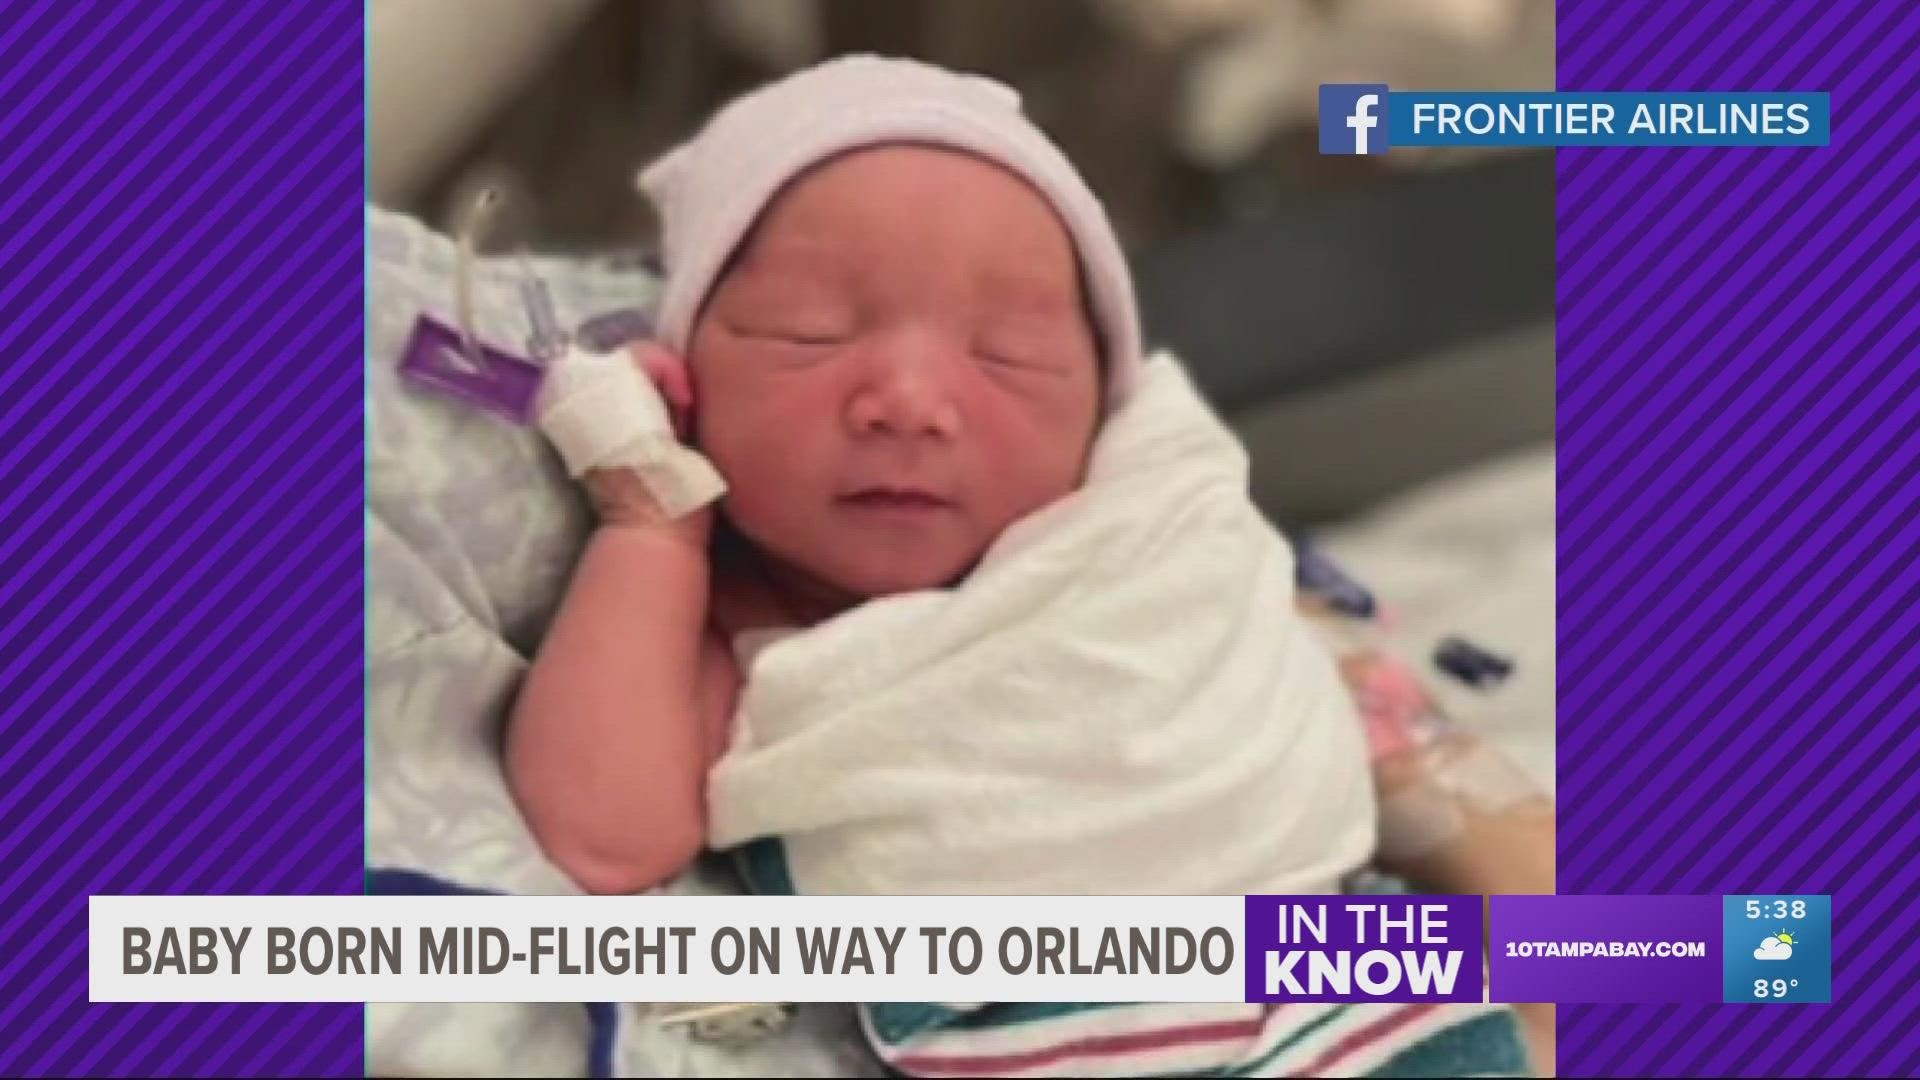 A flight attendant is being credited as going "above and beyond" to help deliver the baby.